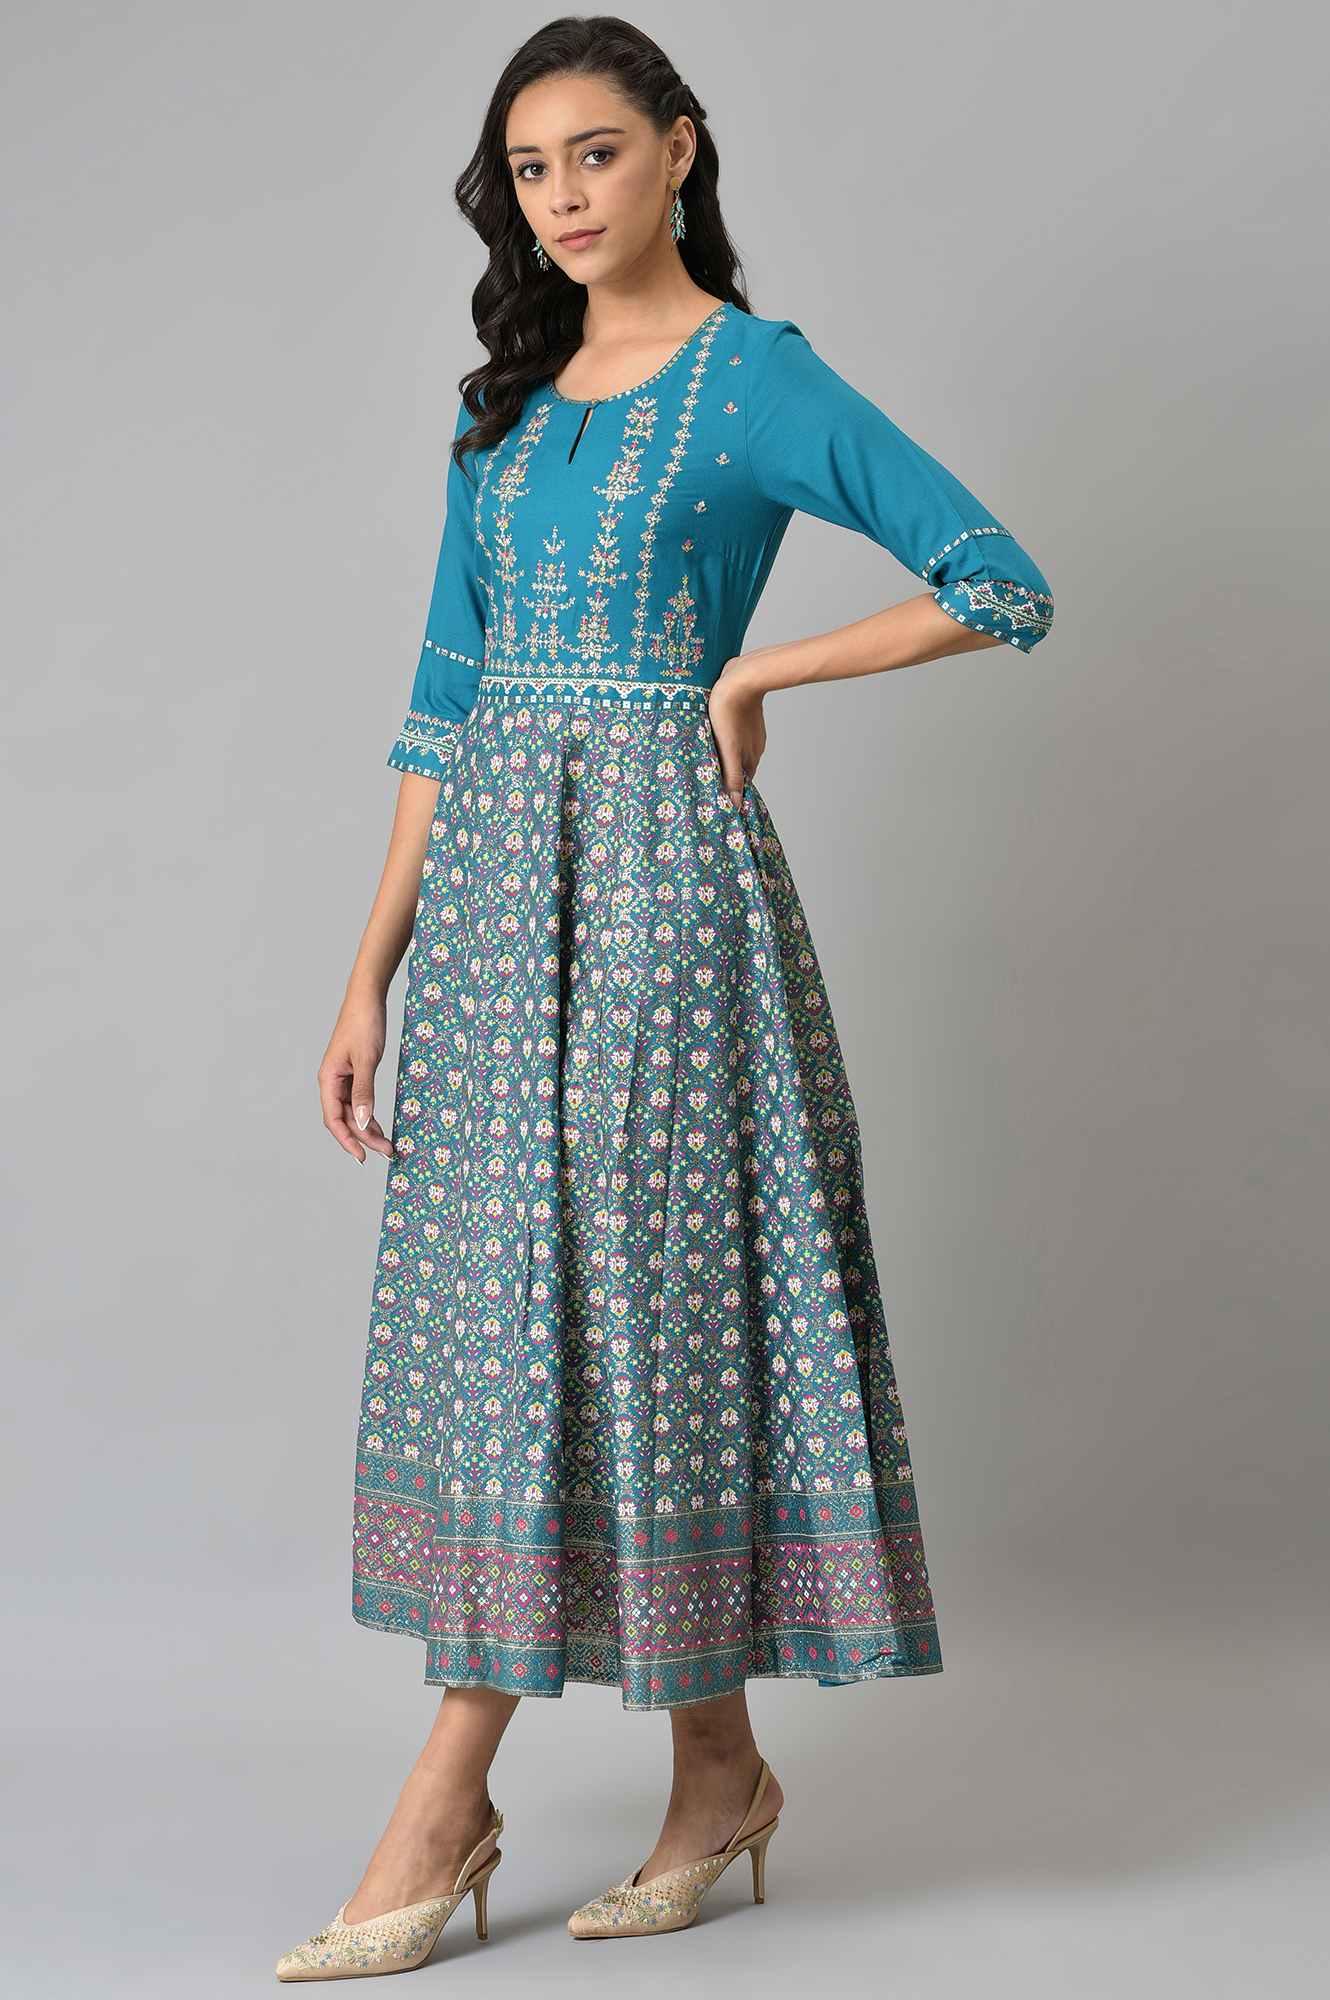 Teal Glitter Printed Dress With Embroidery - wforwoman